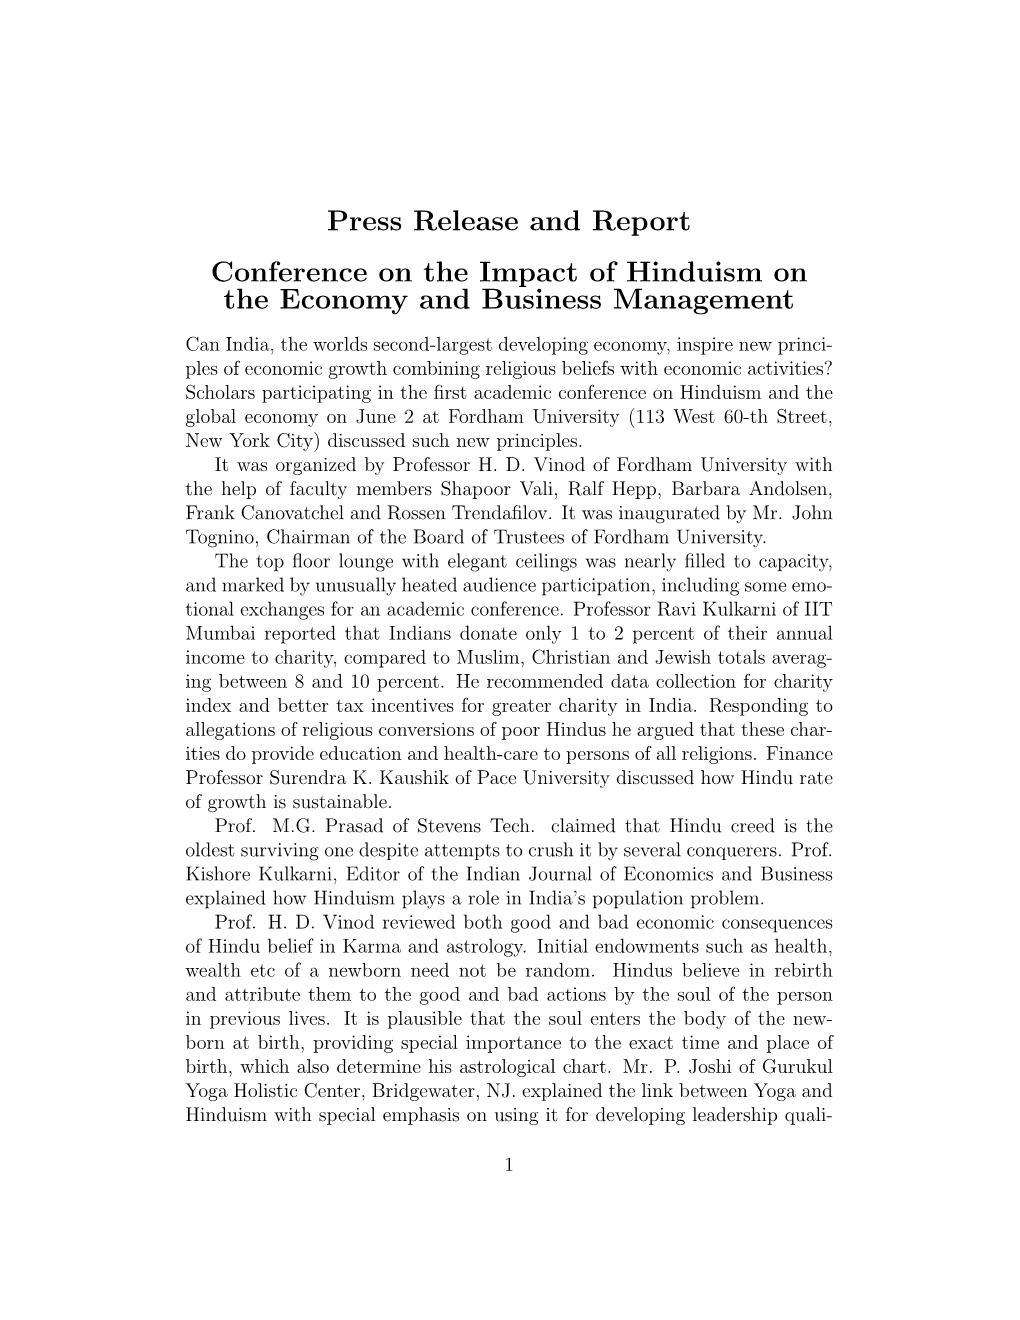 Press Release and Report Conference on the Impact of Hinduism on the Economy and Business Management